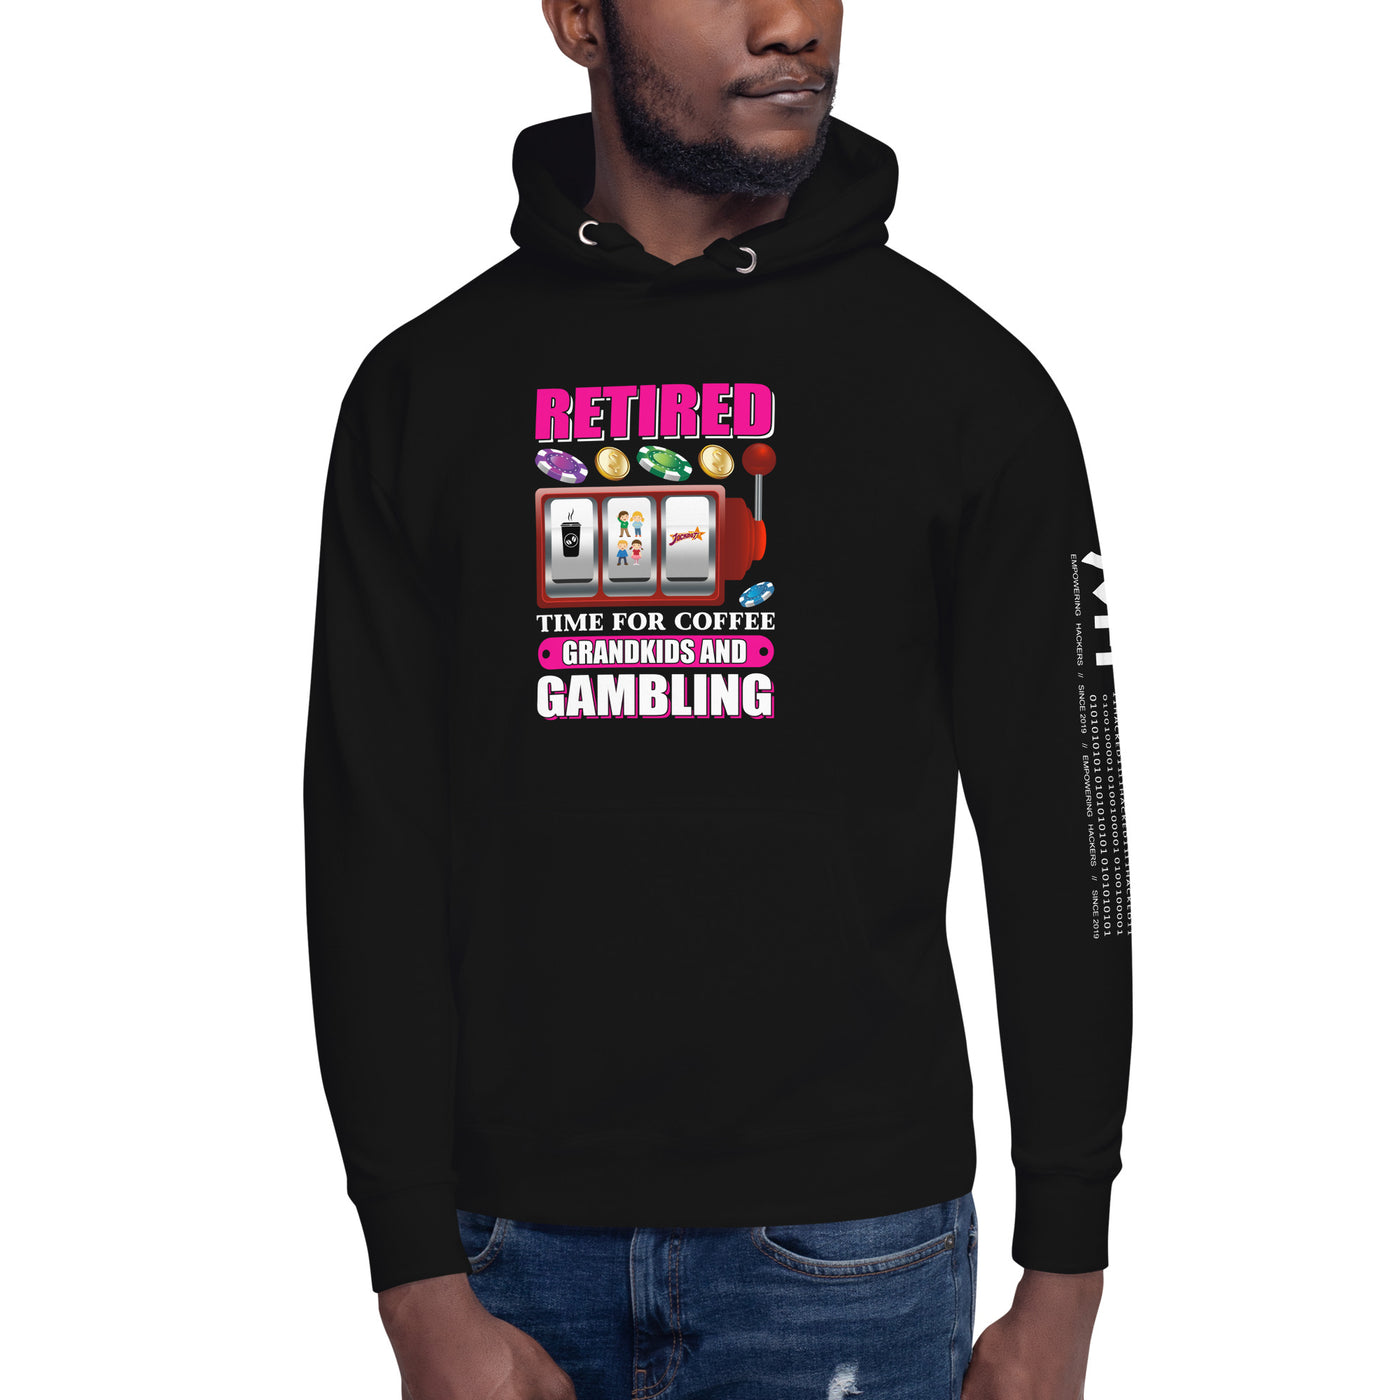 Retired: Time for Coffee, Grandkids and Gambling - Unisex Hoodie